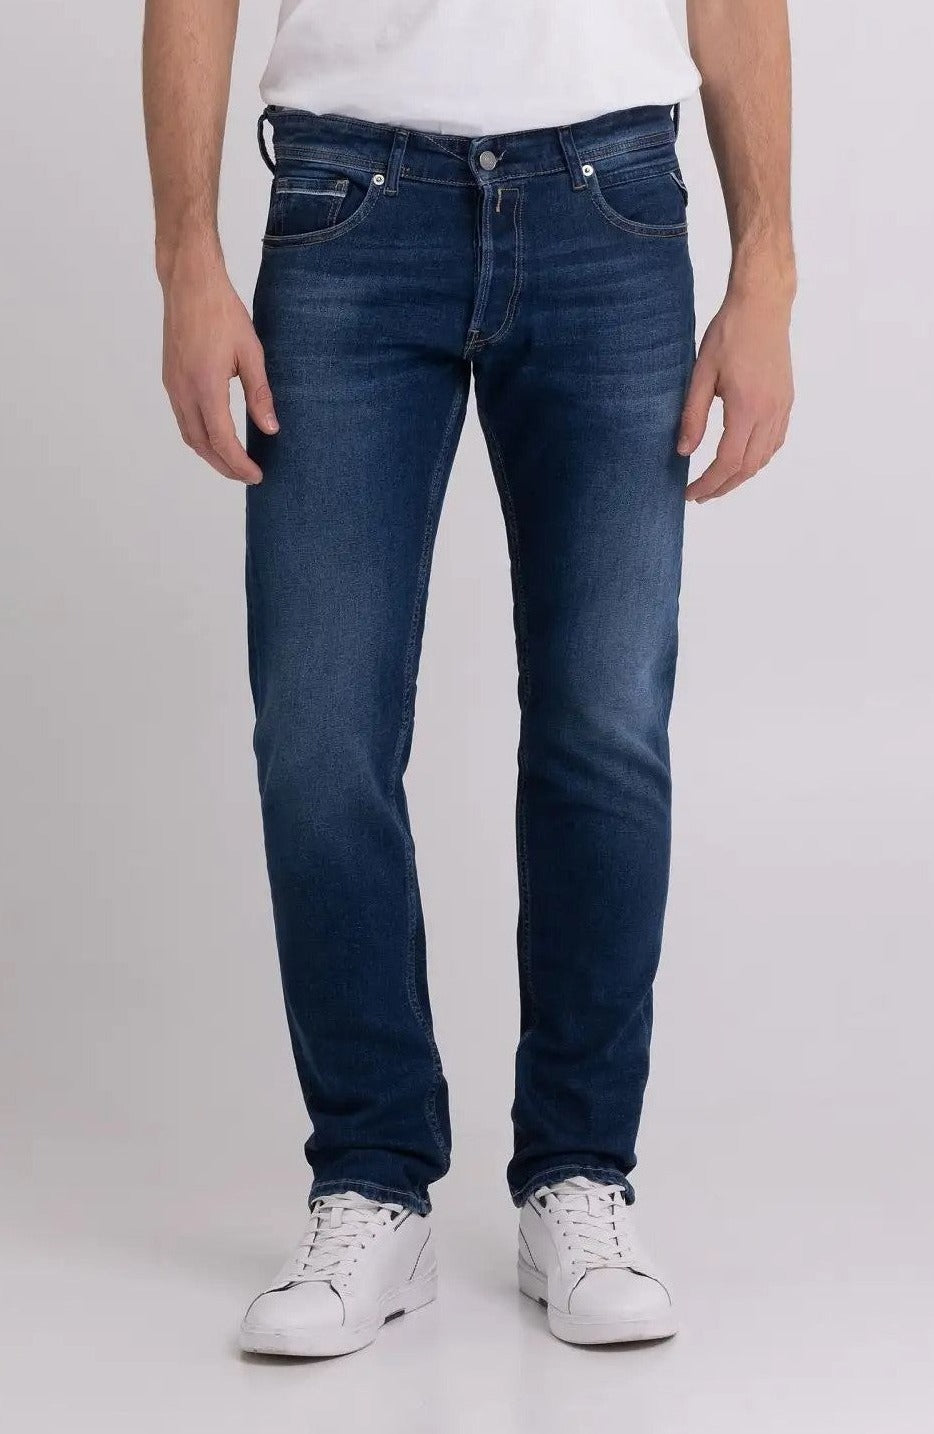 Replay Grover Straight Fit Grover Dark Blue Jeans - MA972 .000.685 488